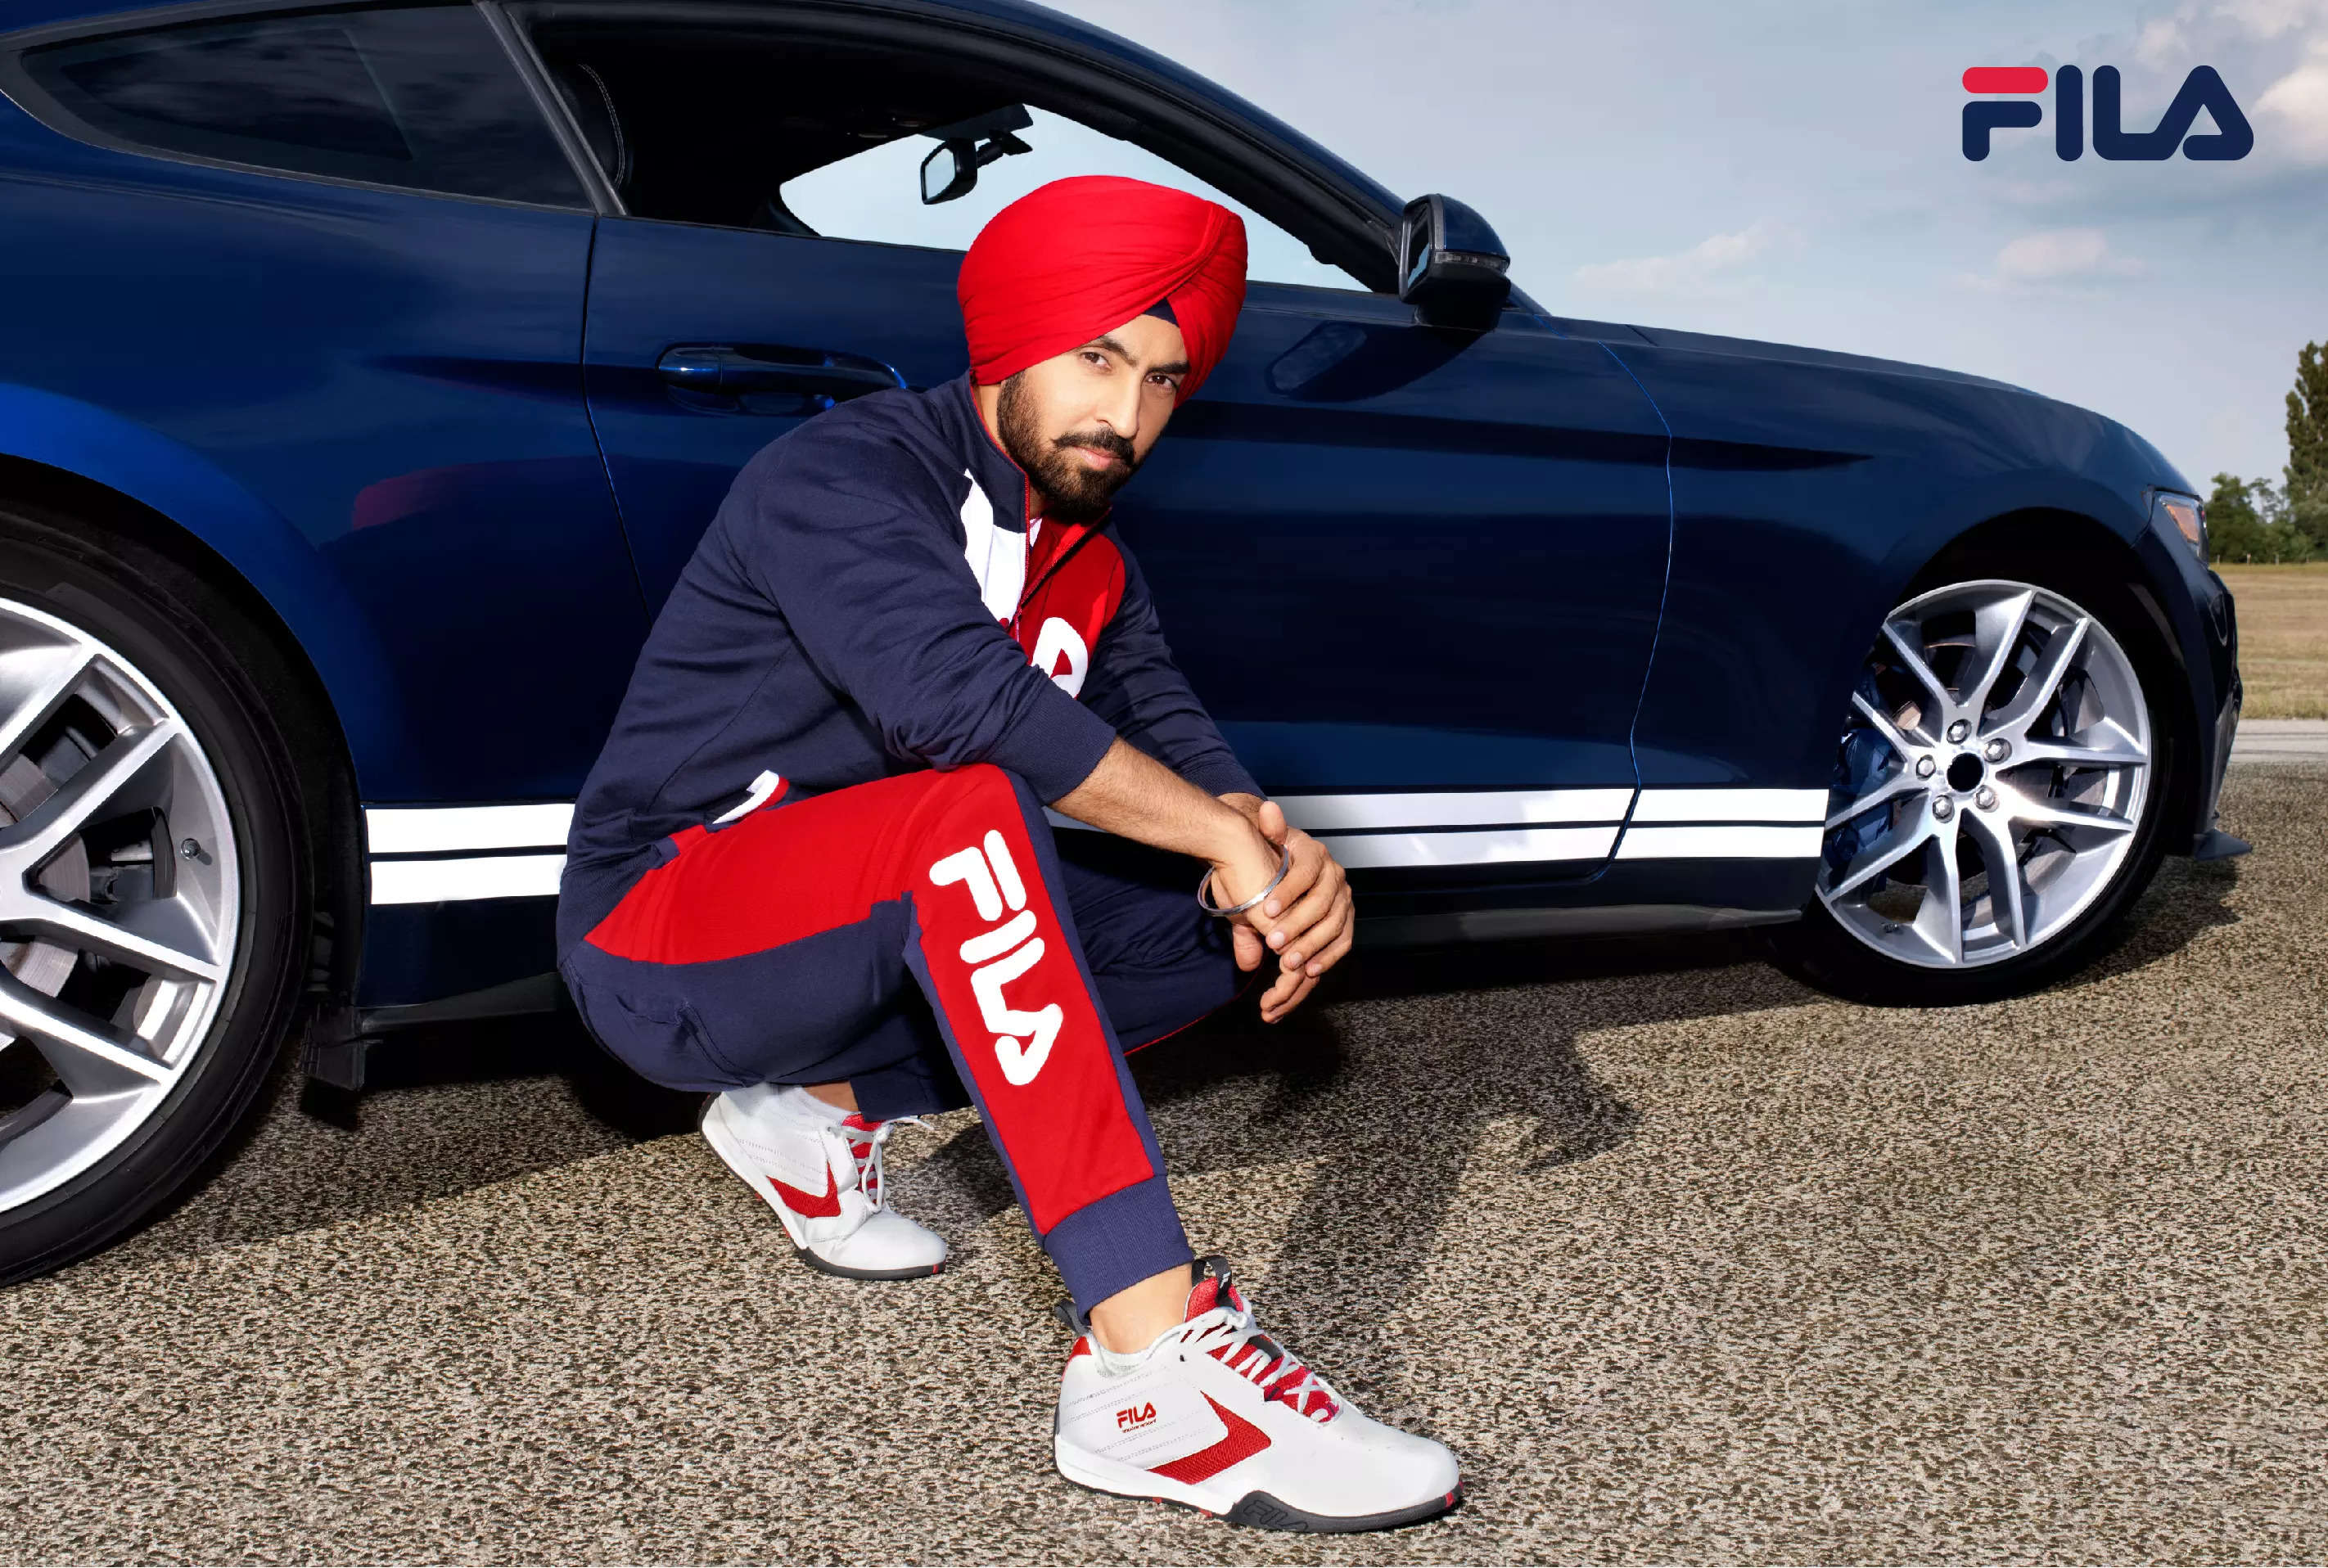 Diljit Dosanjh to be the face of FILA